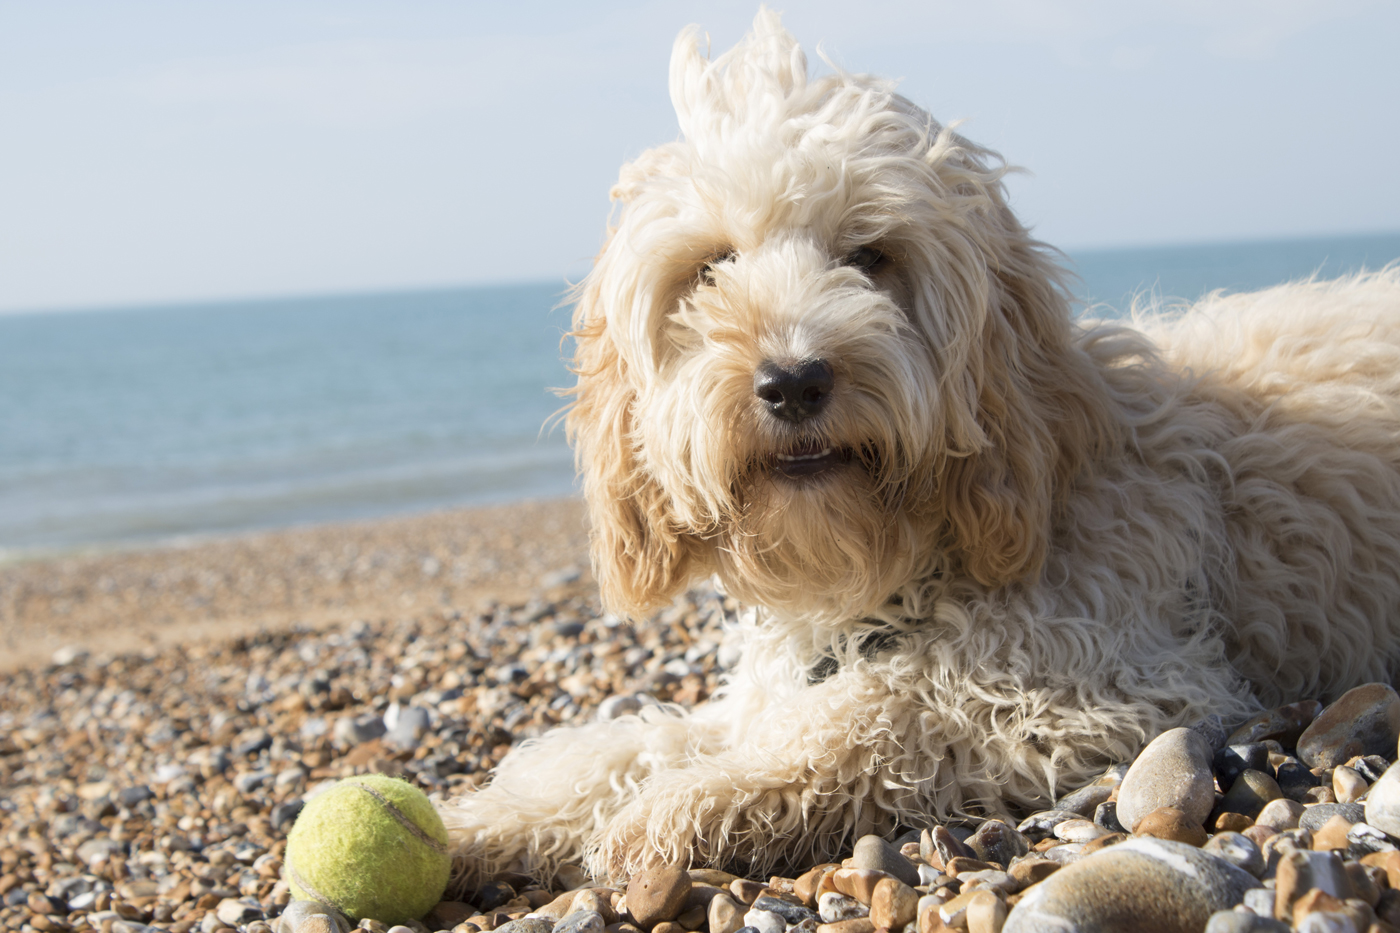 A fluffy white dog laying on a pebbly beach with a tennis ball